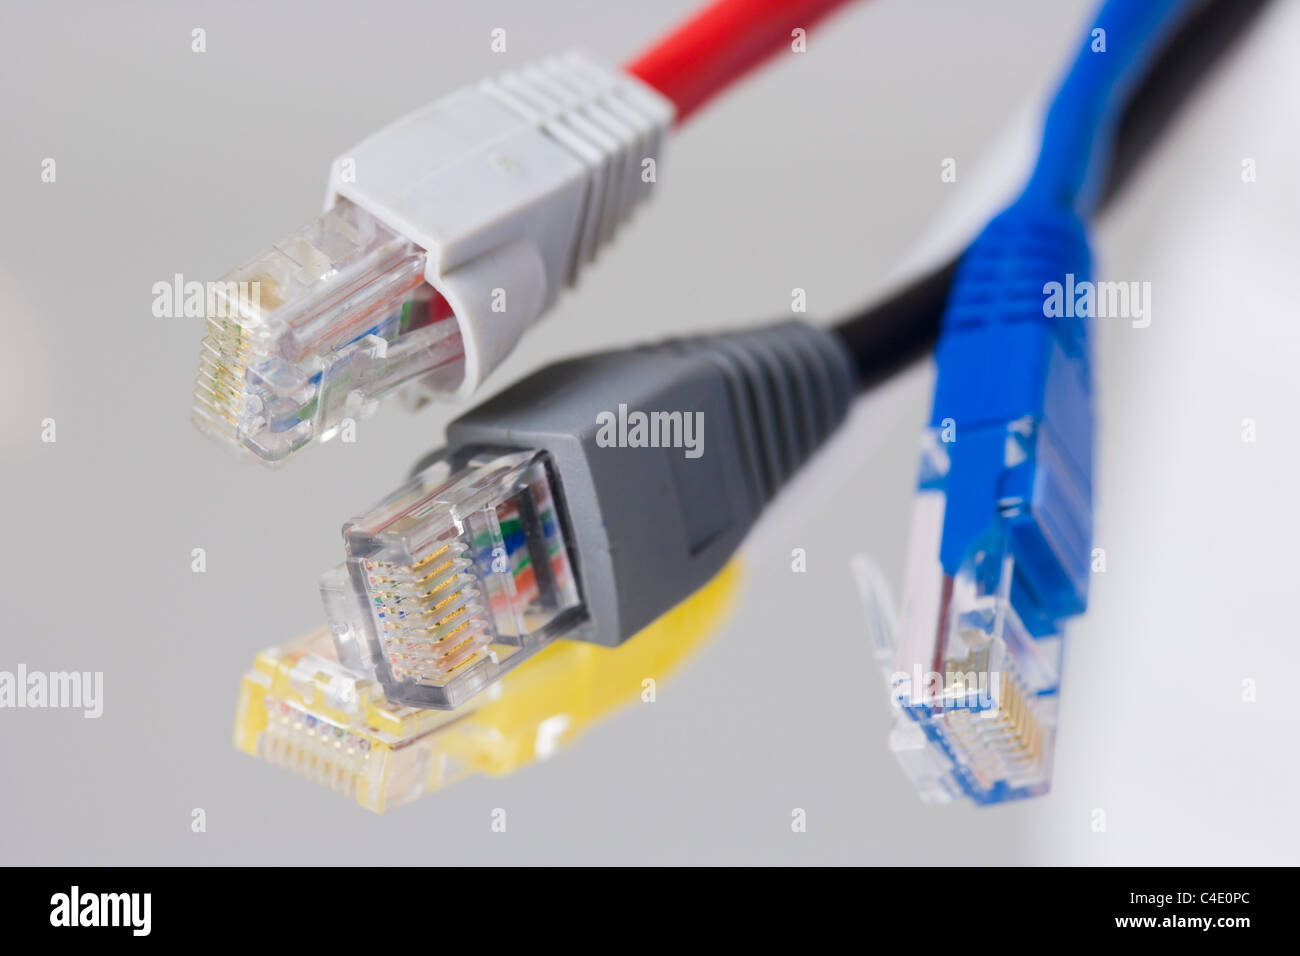 Four RJ-45 Ethernet connectors on white background Stock Photo